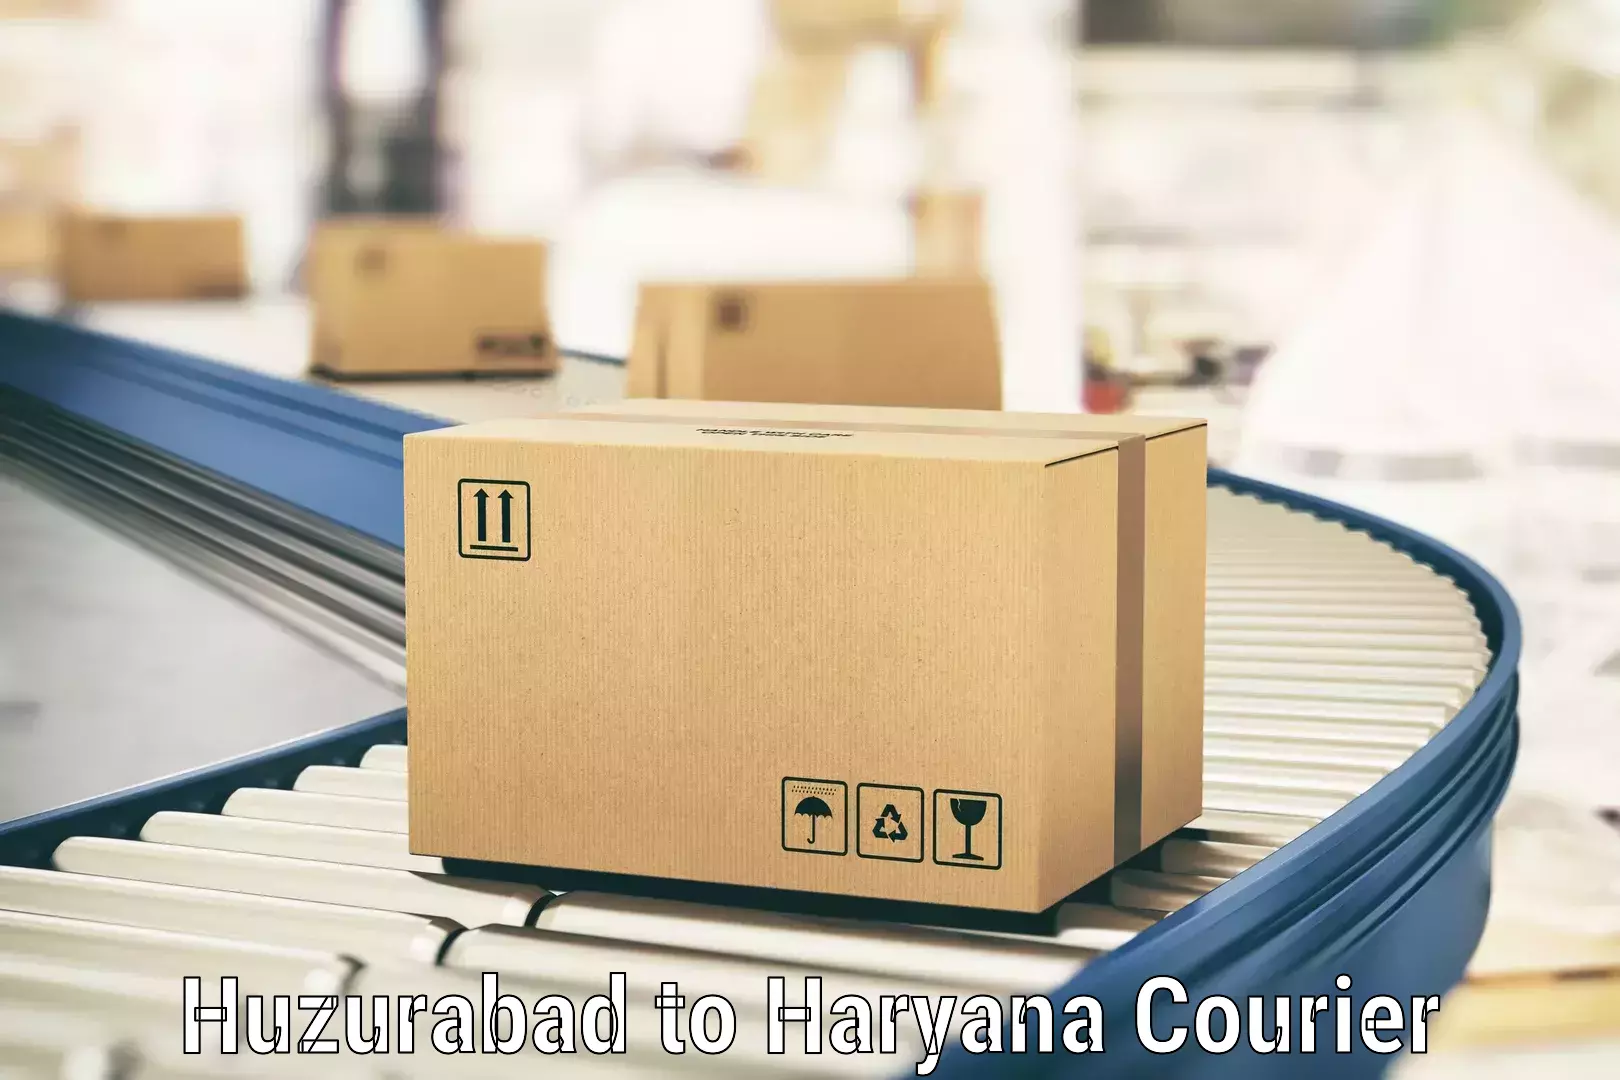 Personal parcel delivery in Huzurabad to Panchkula